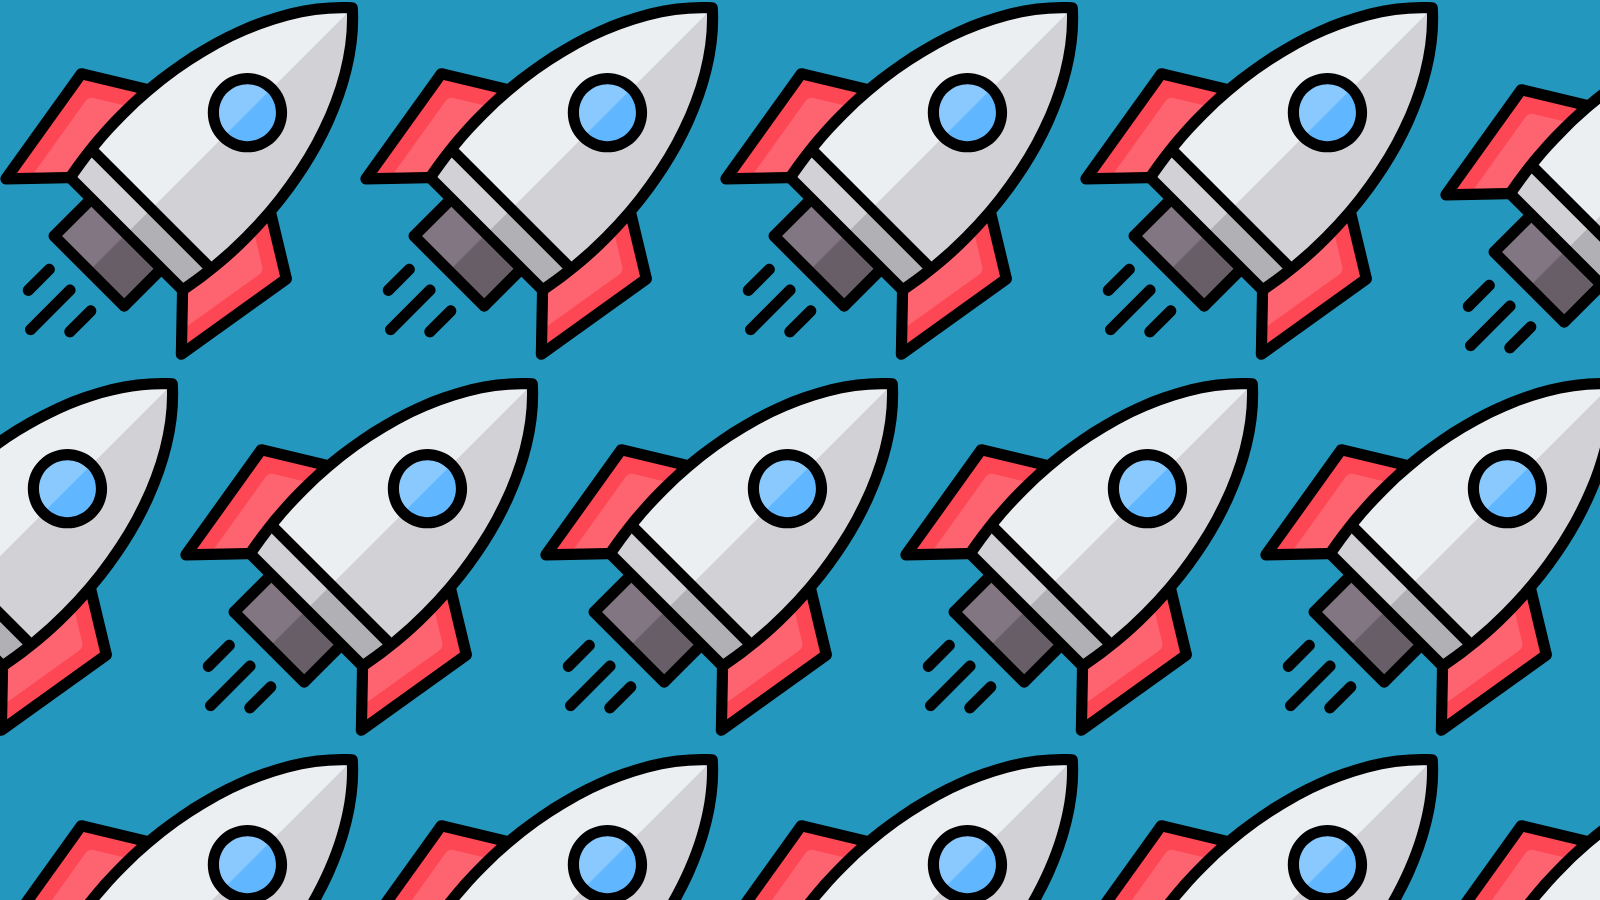 A repeating pattern of cartoon-style rockets